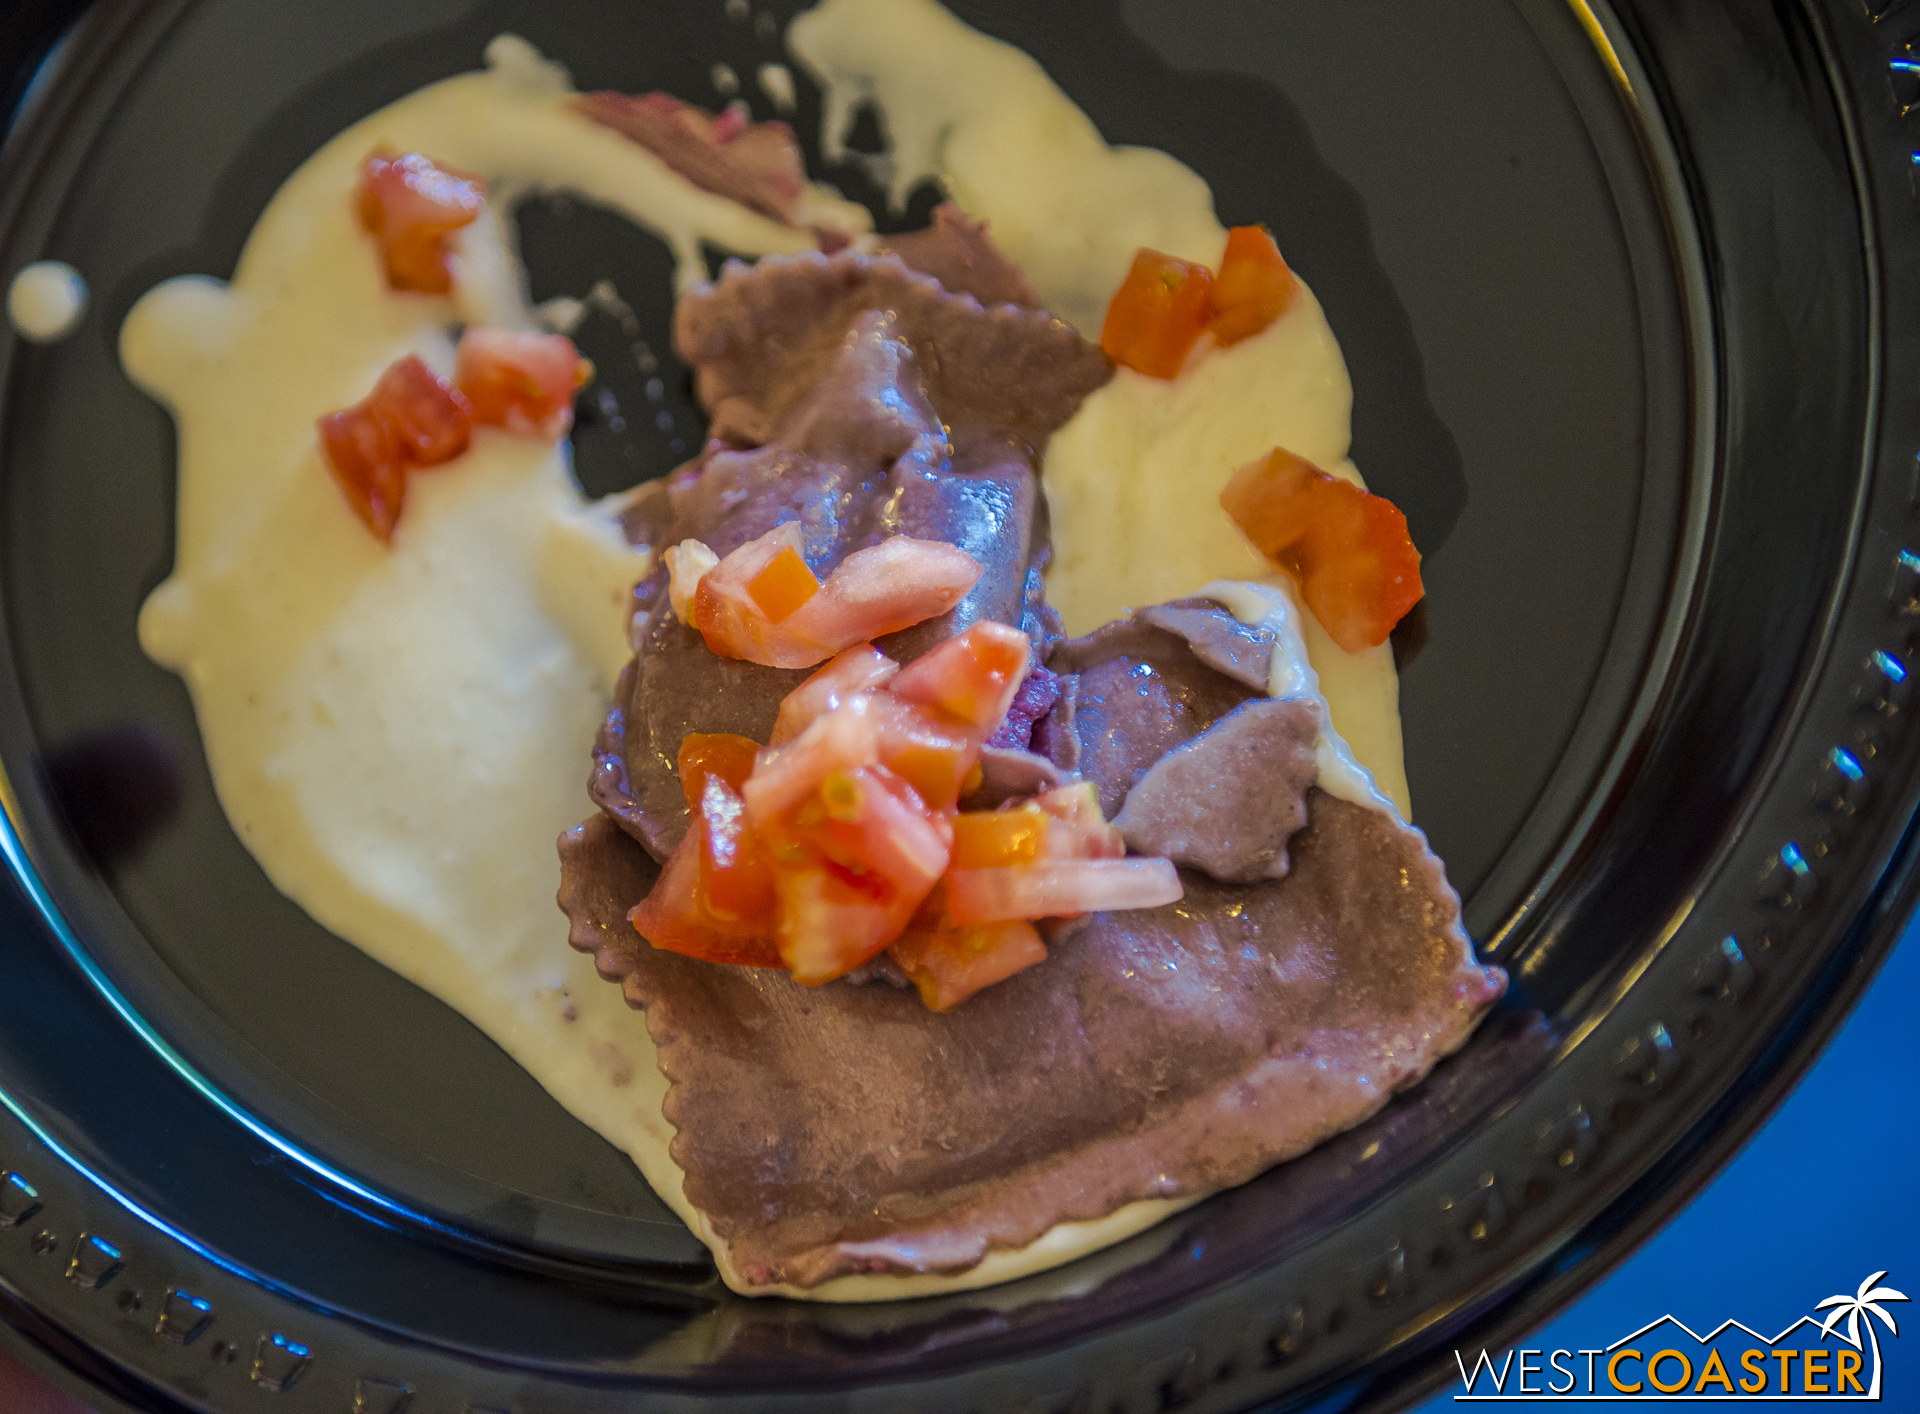  The Boysenberry Ravioli was interesting.&nbsp; I liked it but found the flavor combinations to be a little unexpected, which means this might not be good for everyone.&nbsp; The boysenberry pasta mixed with ricotta cheese had a nice tangy flavor, an